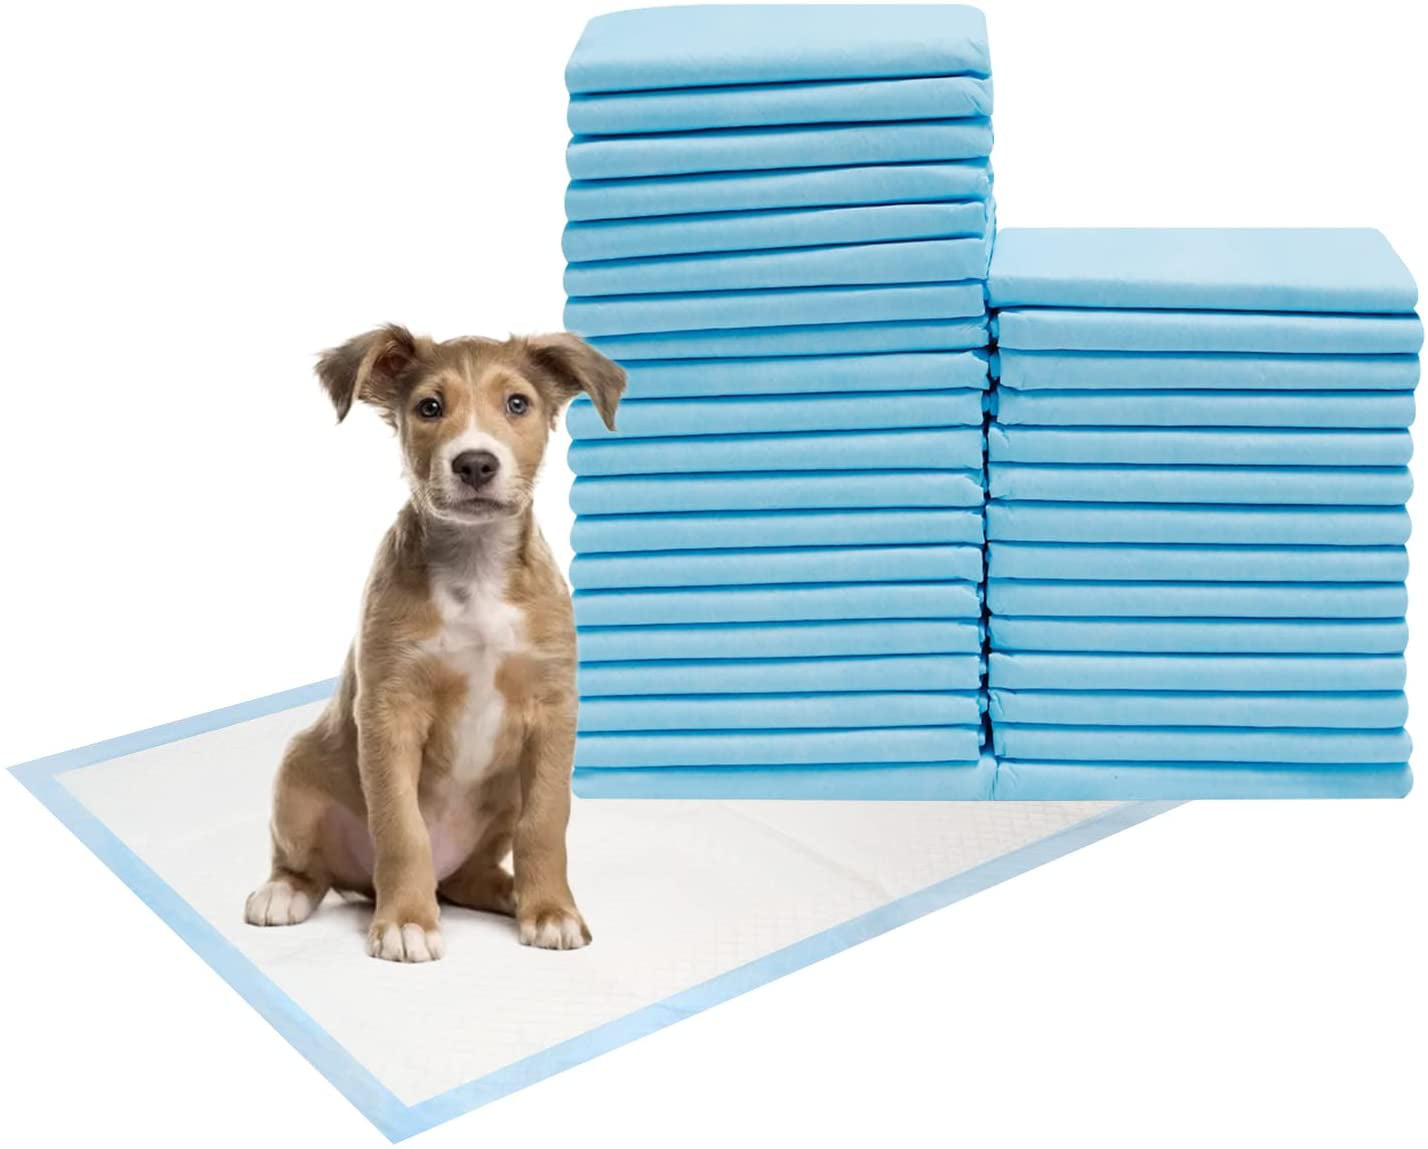 Protection Training Potty Pee Pads Diaper for Dog Pet Puppy Regular & Heavy Duty 